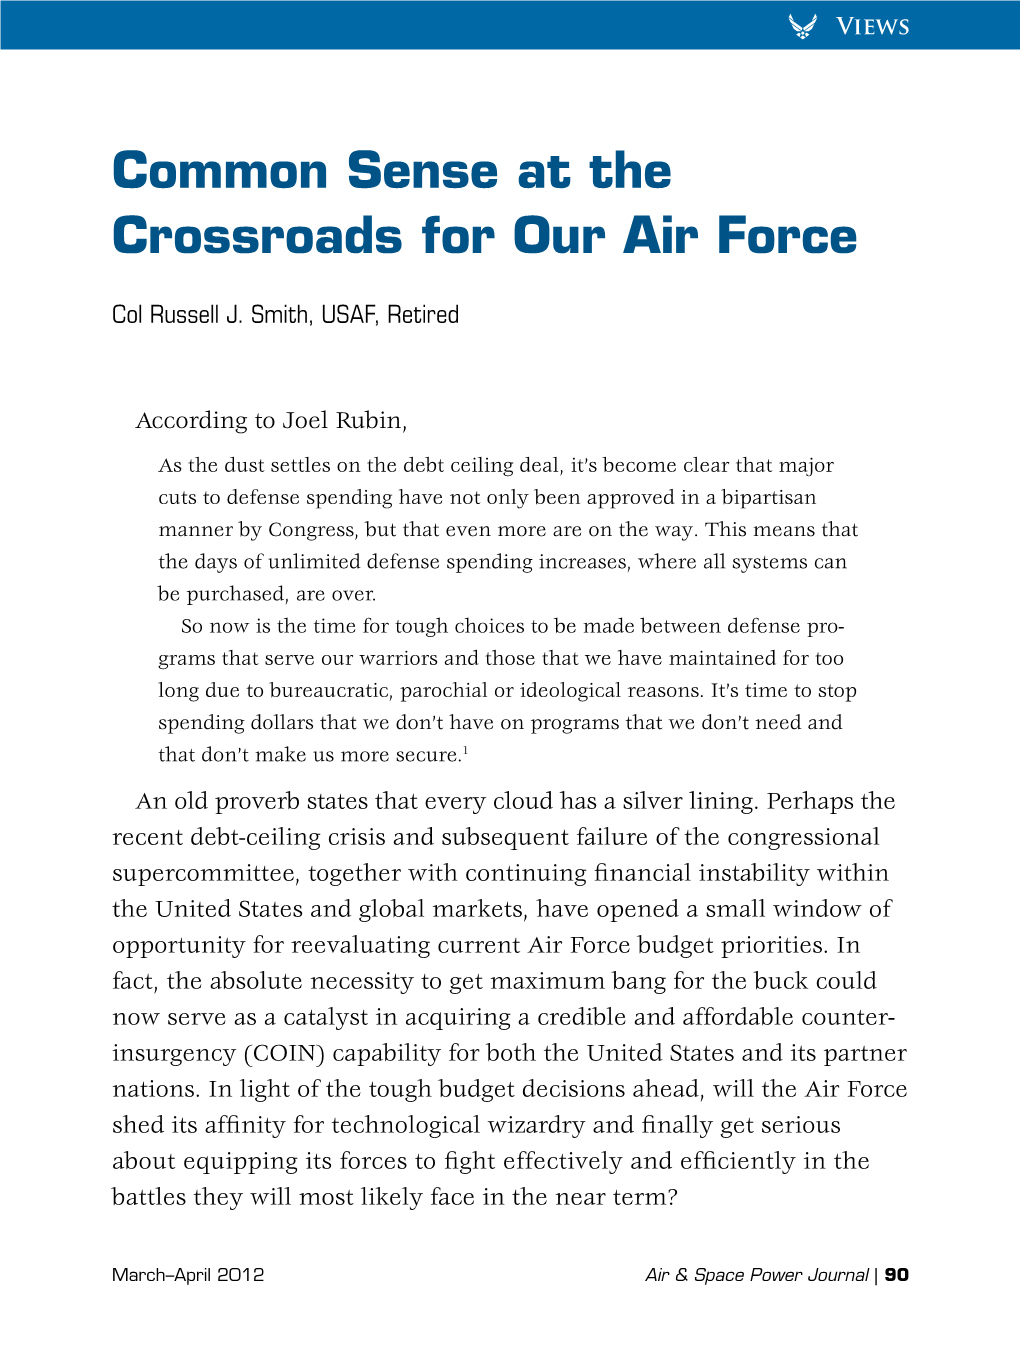 Common Sense at the Crossroads for Our Air Force